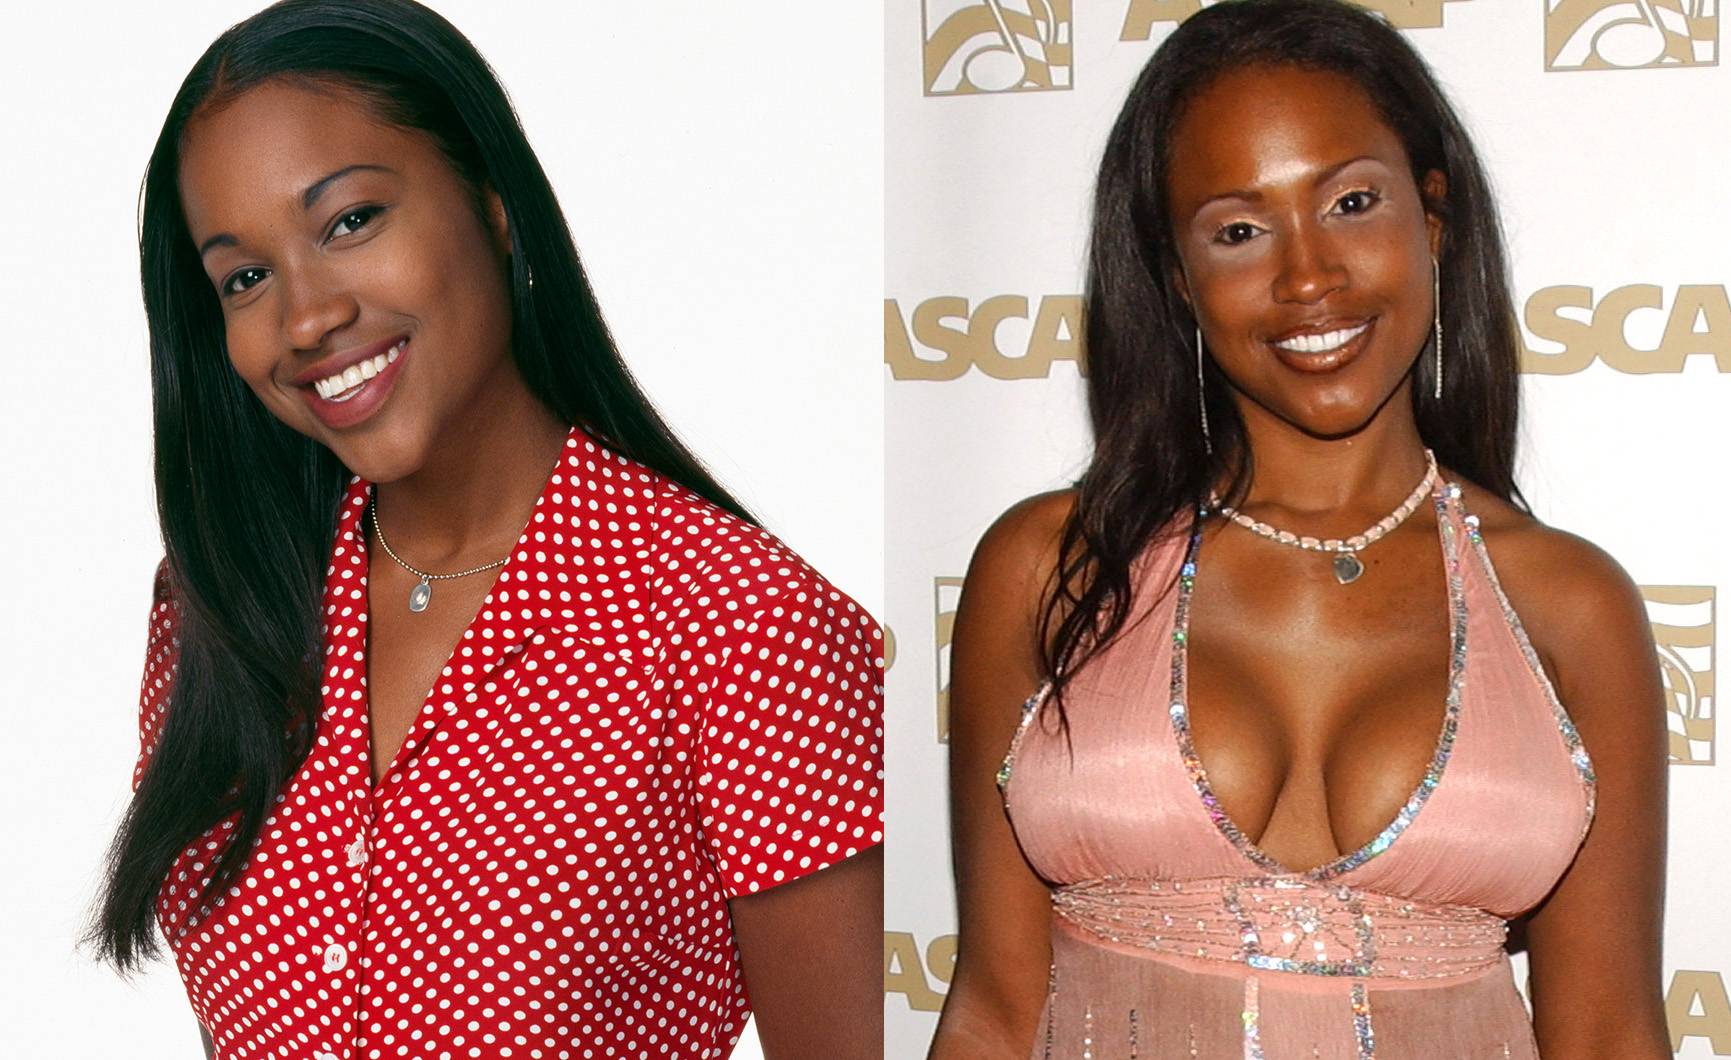 Maia Campbell After Image 6 from 11 Child Stars Gone Wild BET